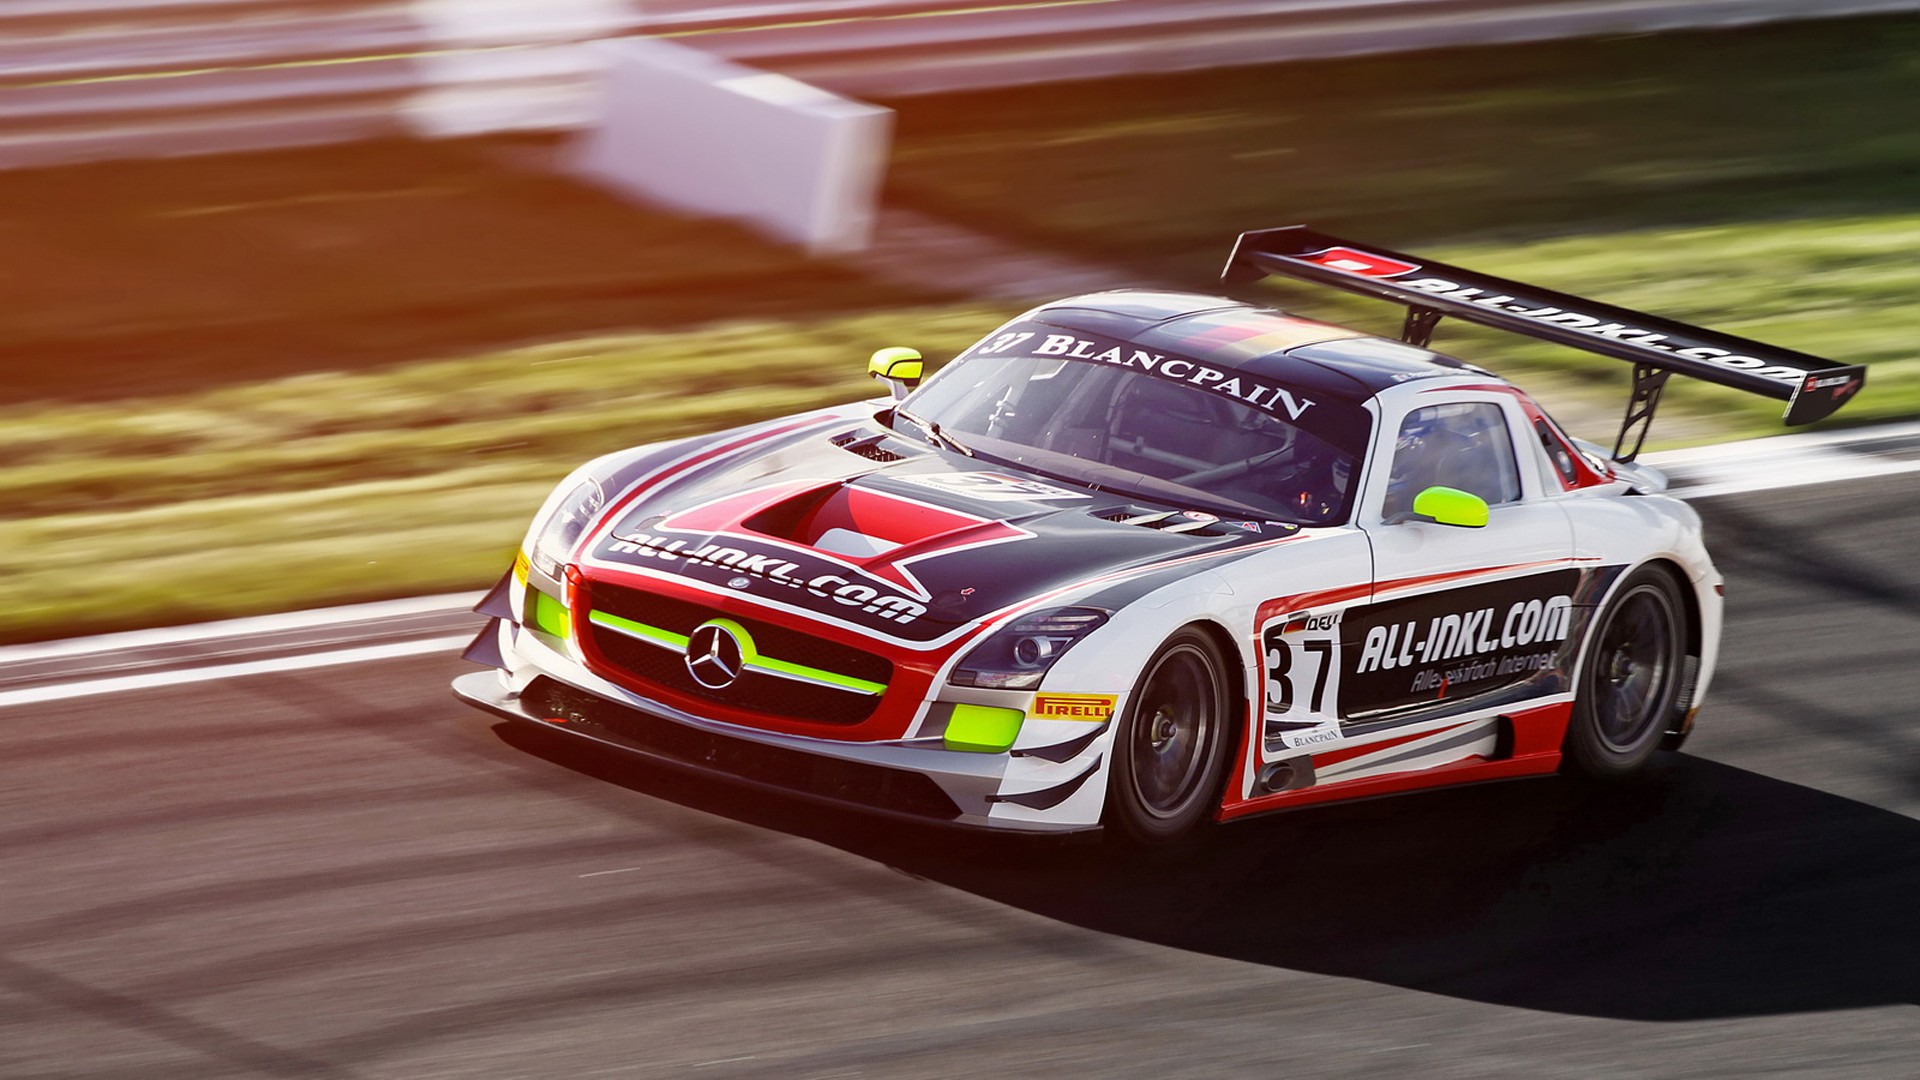 mercedes, Sls, Gullwing, Amg, Race, Car, Motion, Blur, Racing, Track, Roads, Wings, Vehicles, Cars, Auto, Color Wallpaper